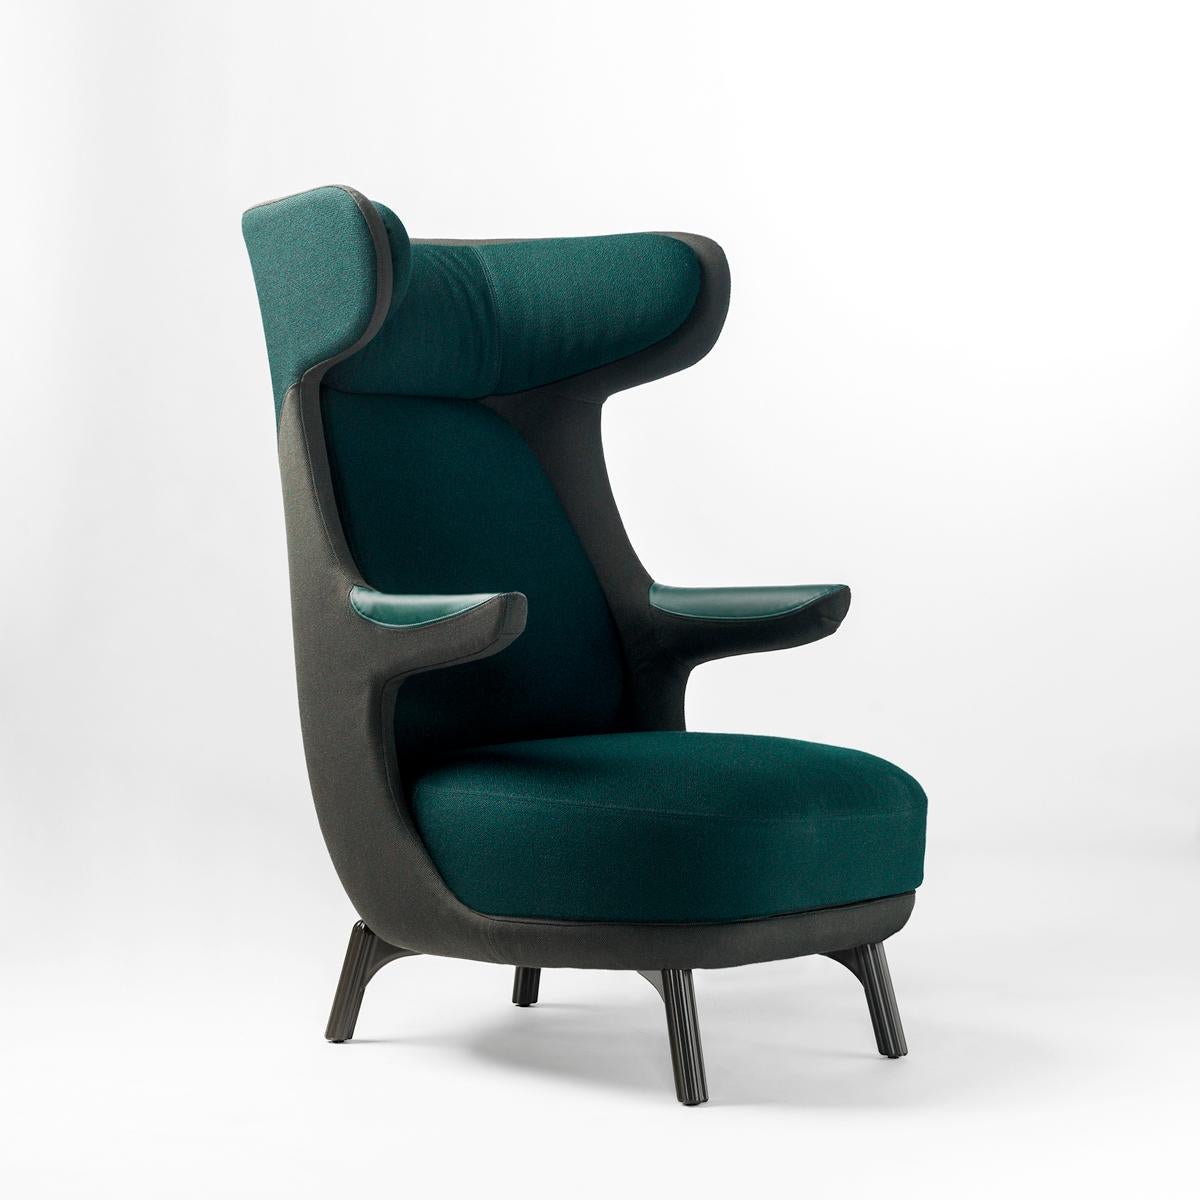 Jaime Hayon, Dino Armchair Contemporary Green Hayon Edition Upholstery For Sale 1